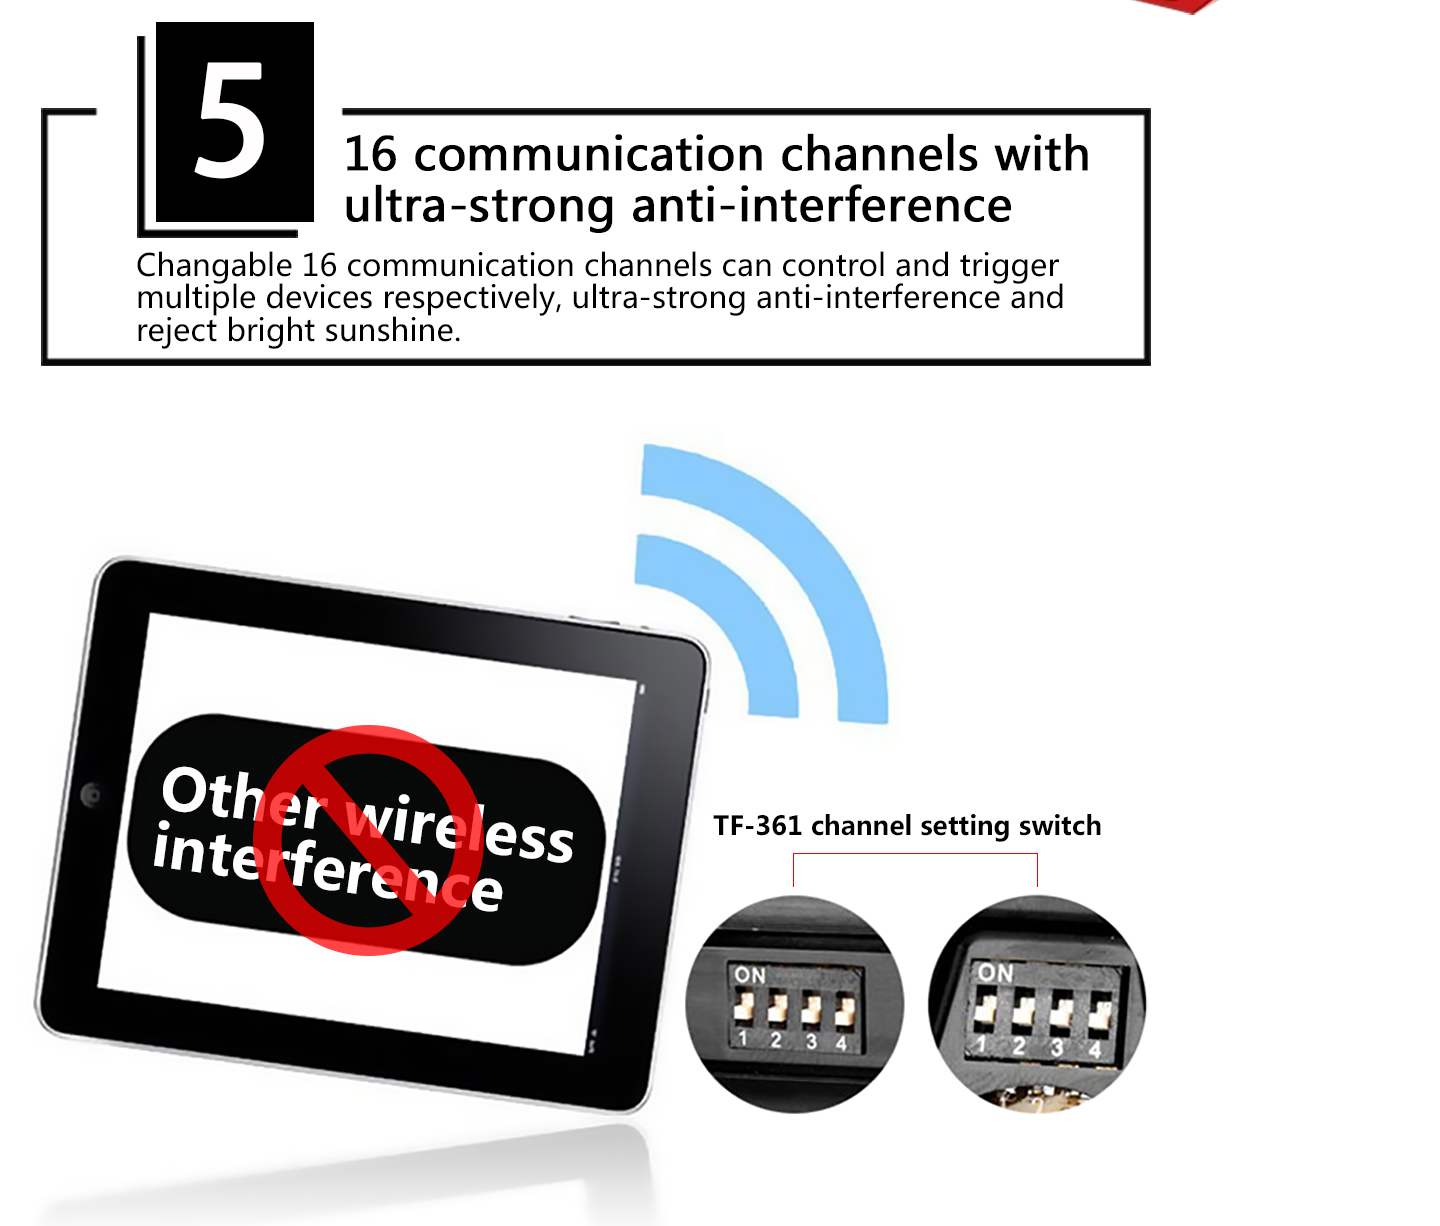 16 communication channels with ultra-strong anti-interference